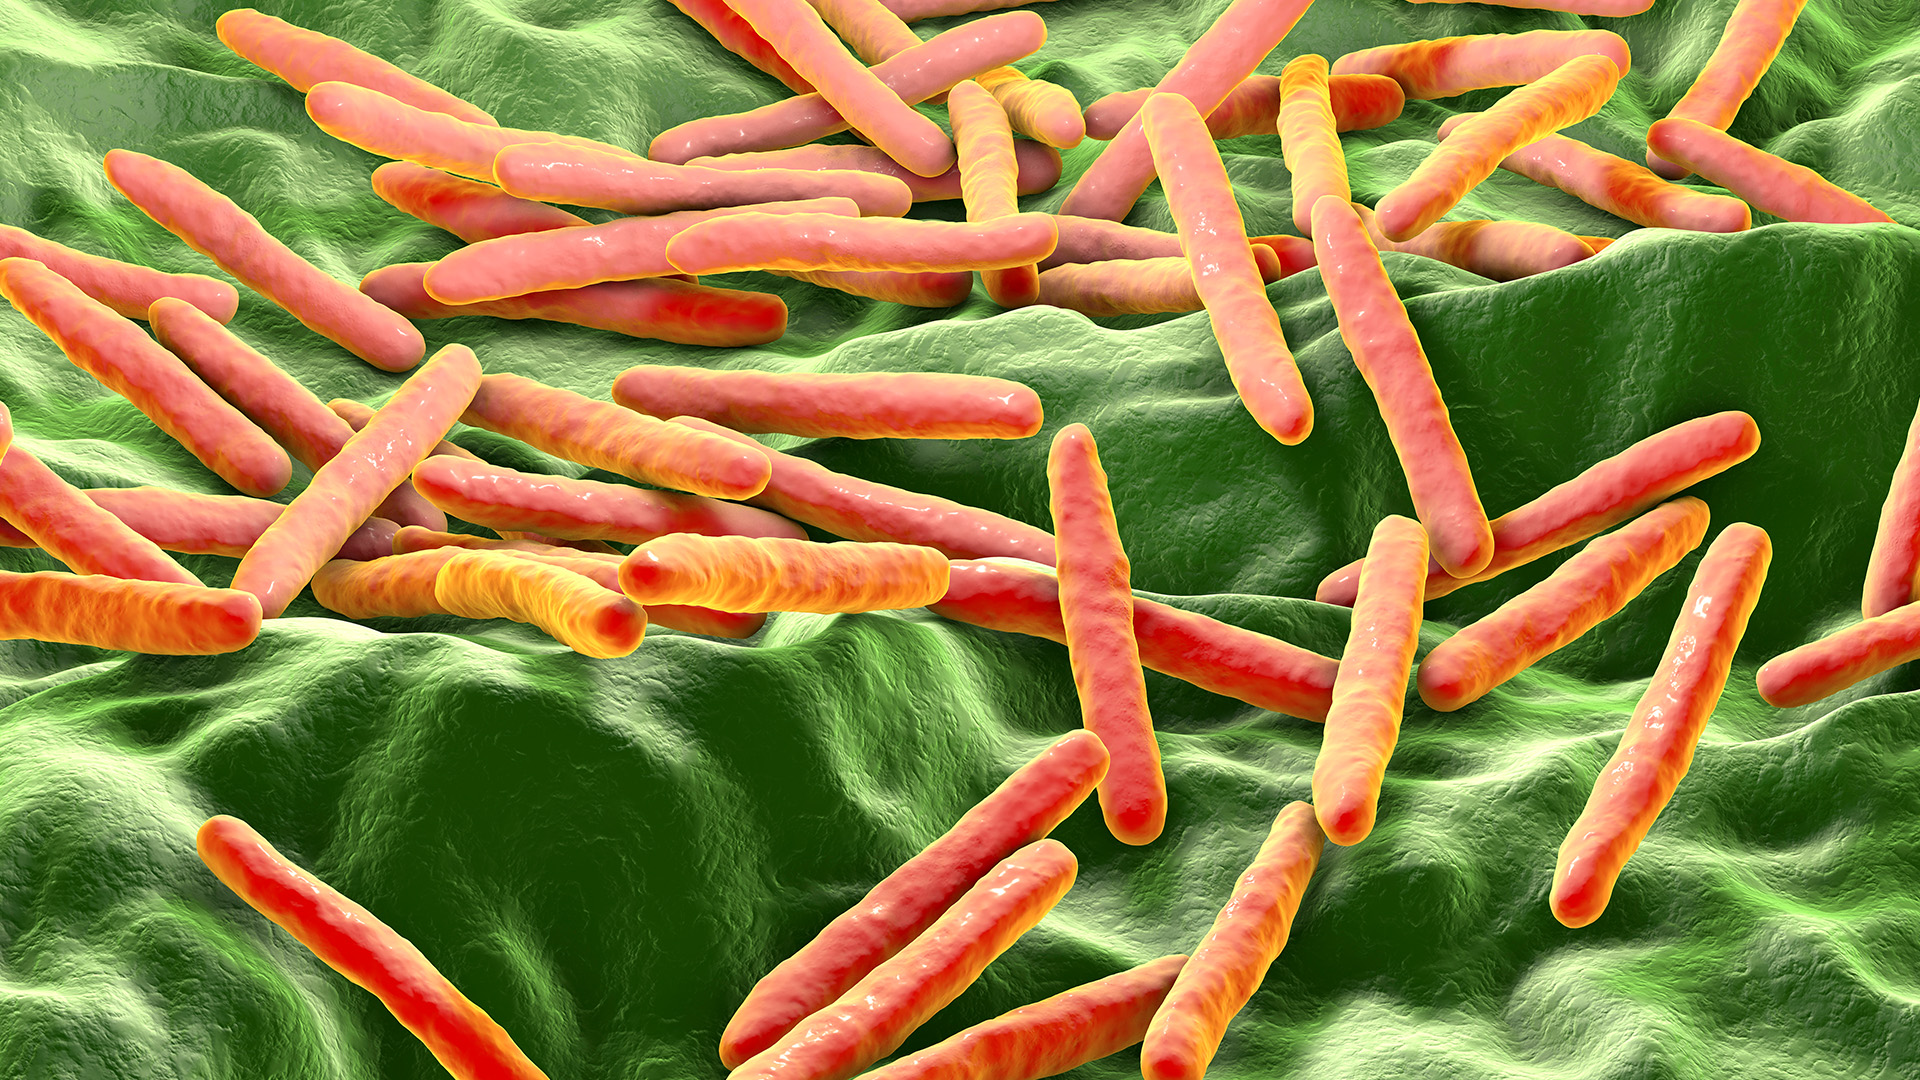 New Insights into Antibodies Against Tuberculosis